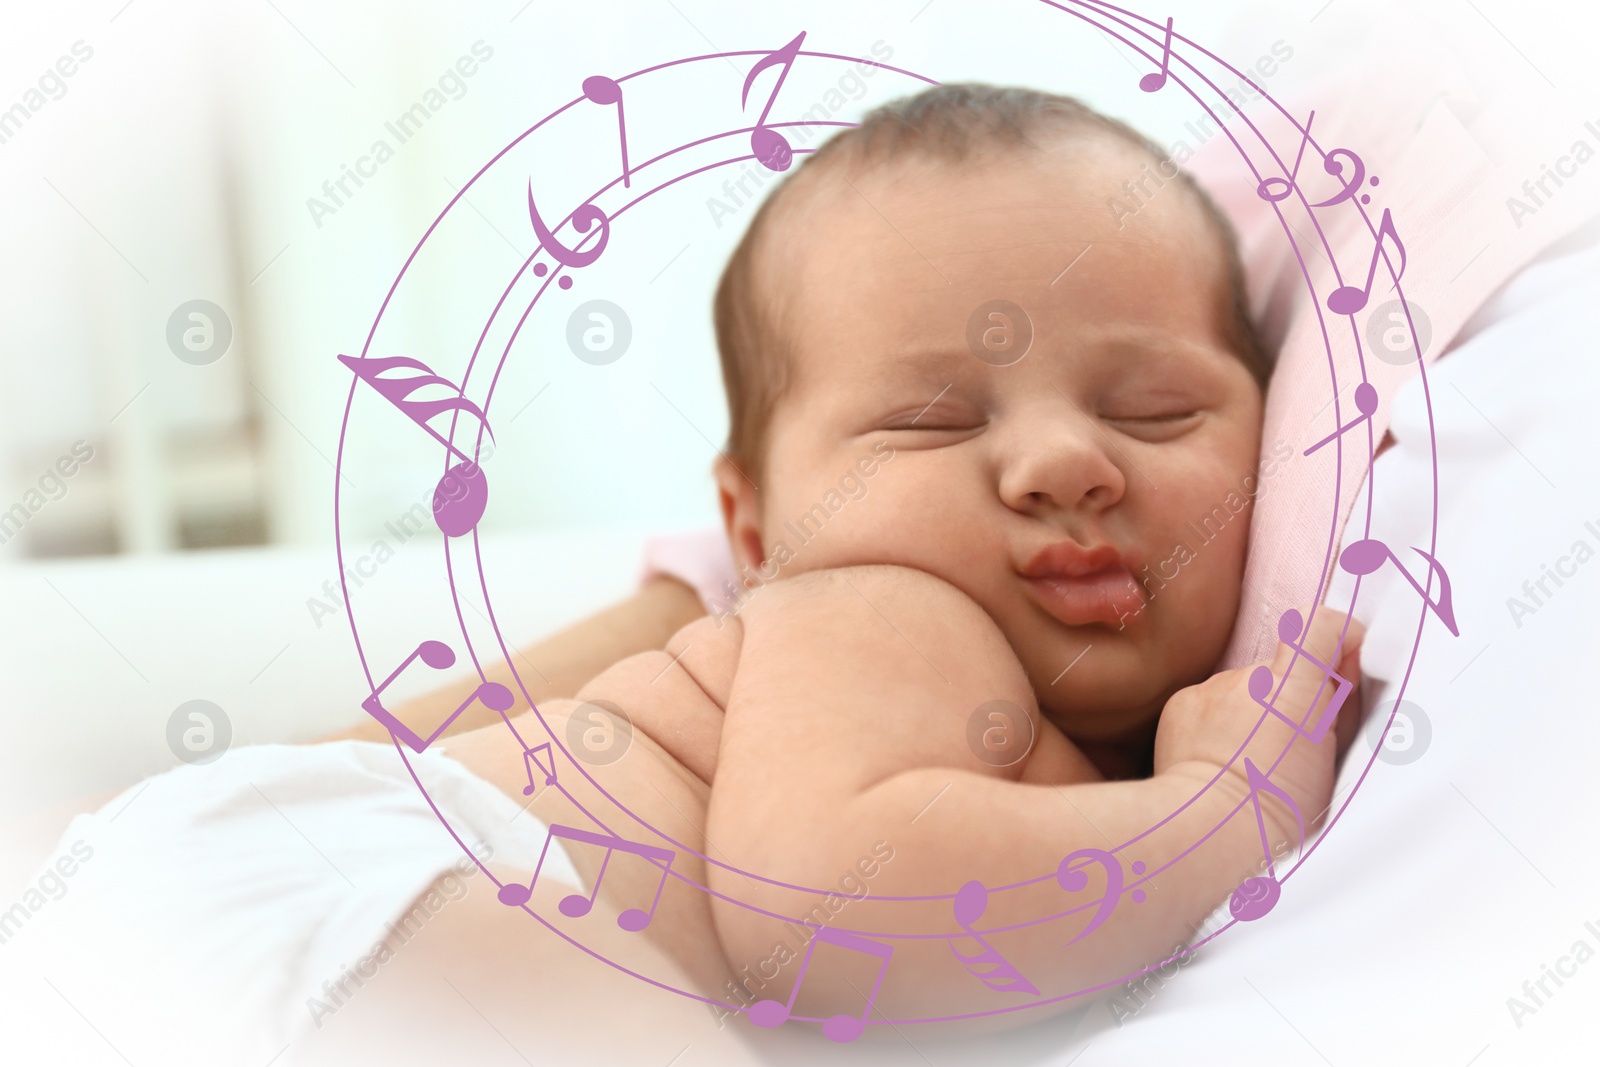 Image of Lullaby songs. Baby sleeping in mother's arms at home, closeup. Illustration of flying music notes around child